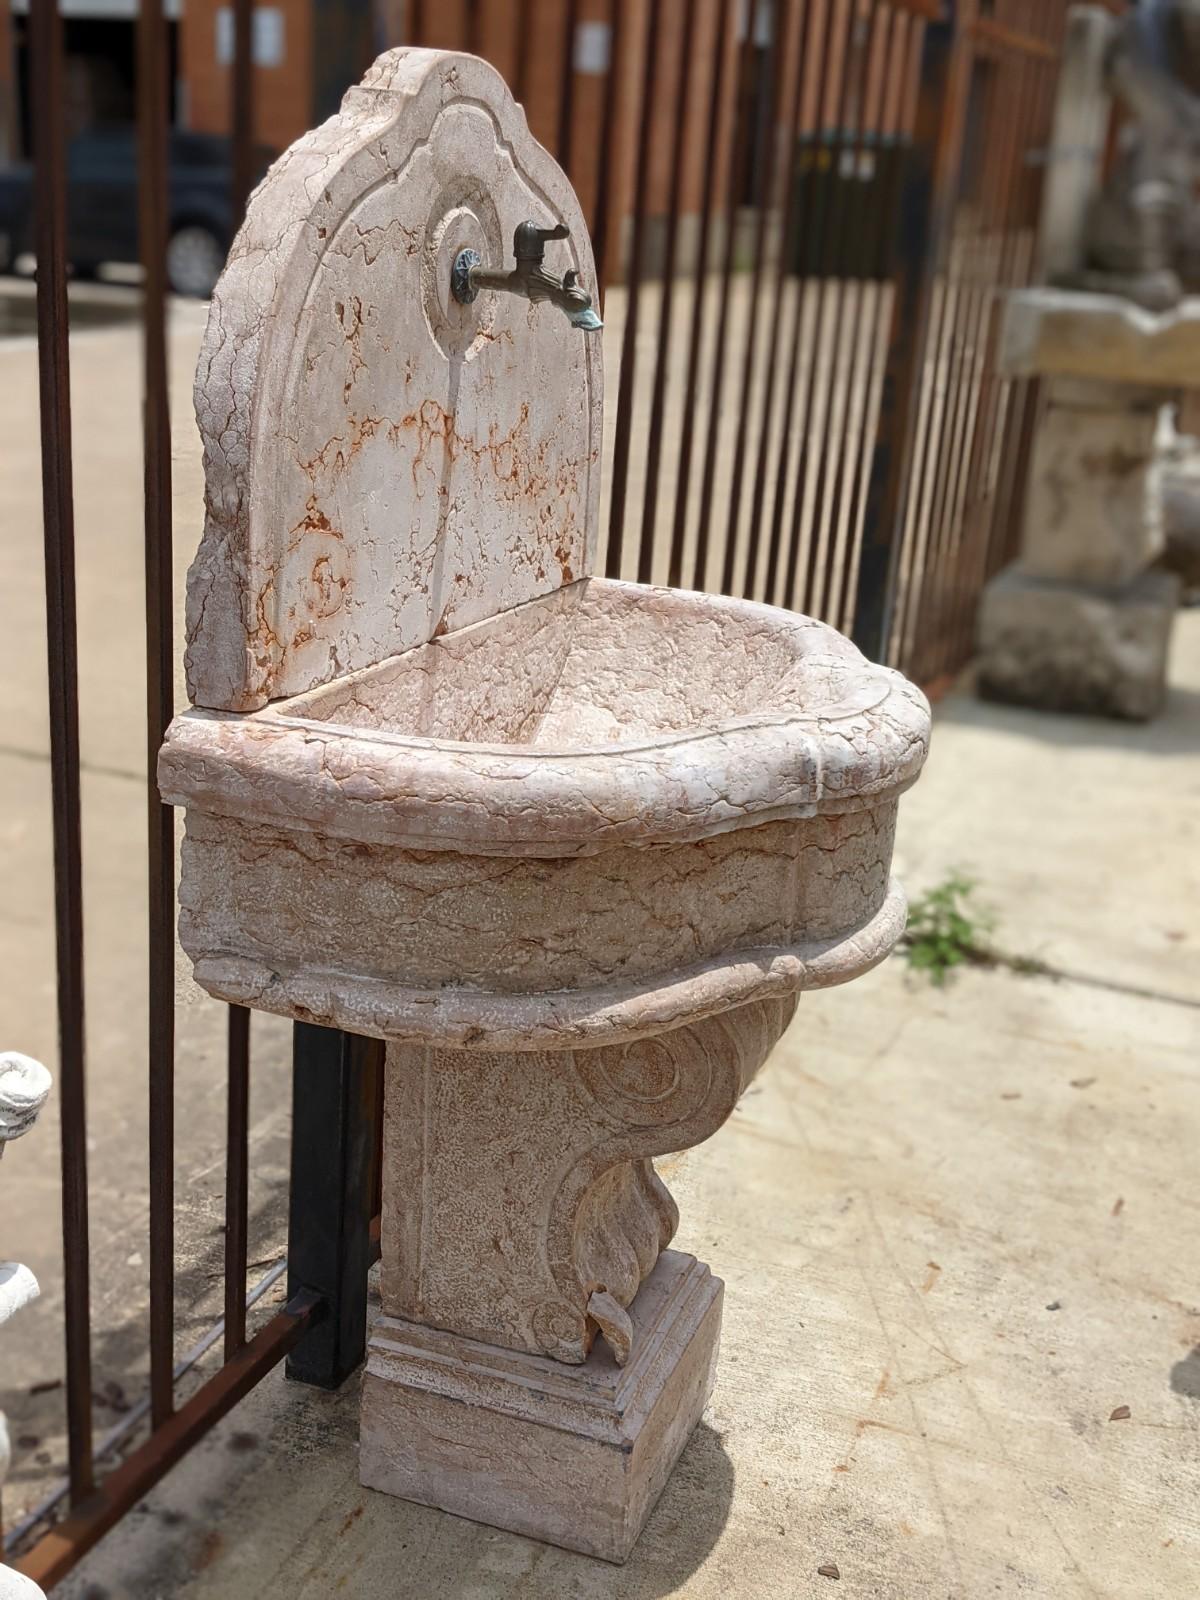 This limestone fountain origins from Italy, circa 1850.